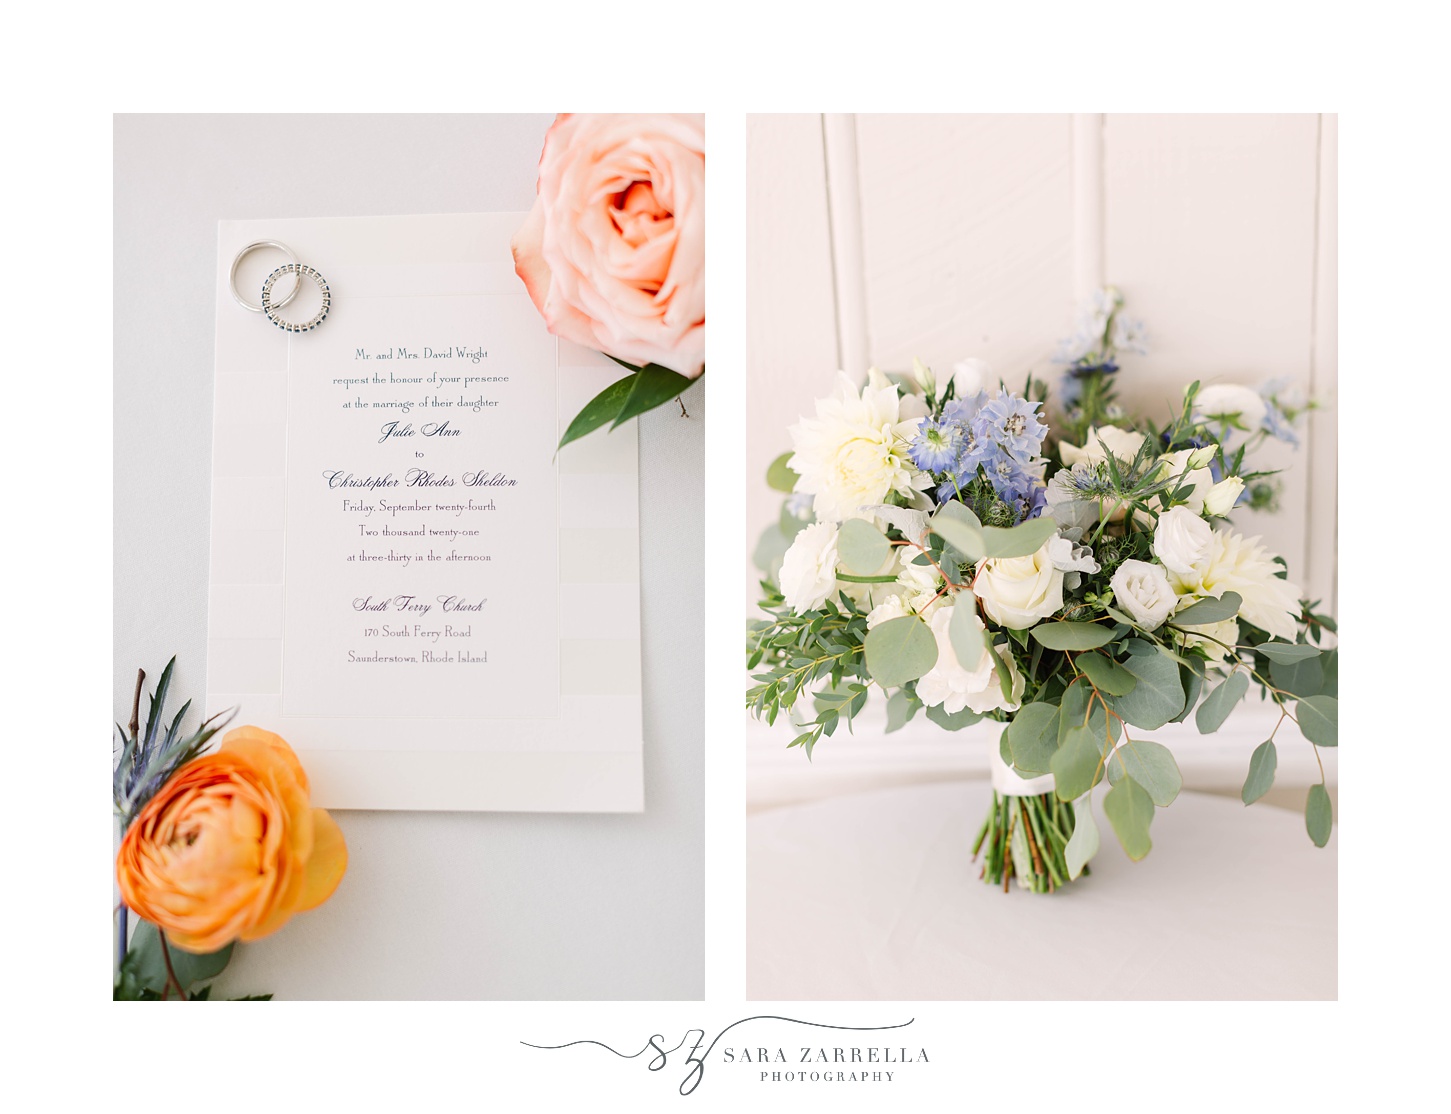 invitation and bouquet for Dunes Club wedding